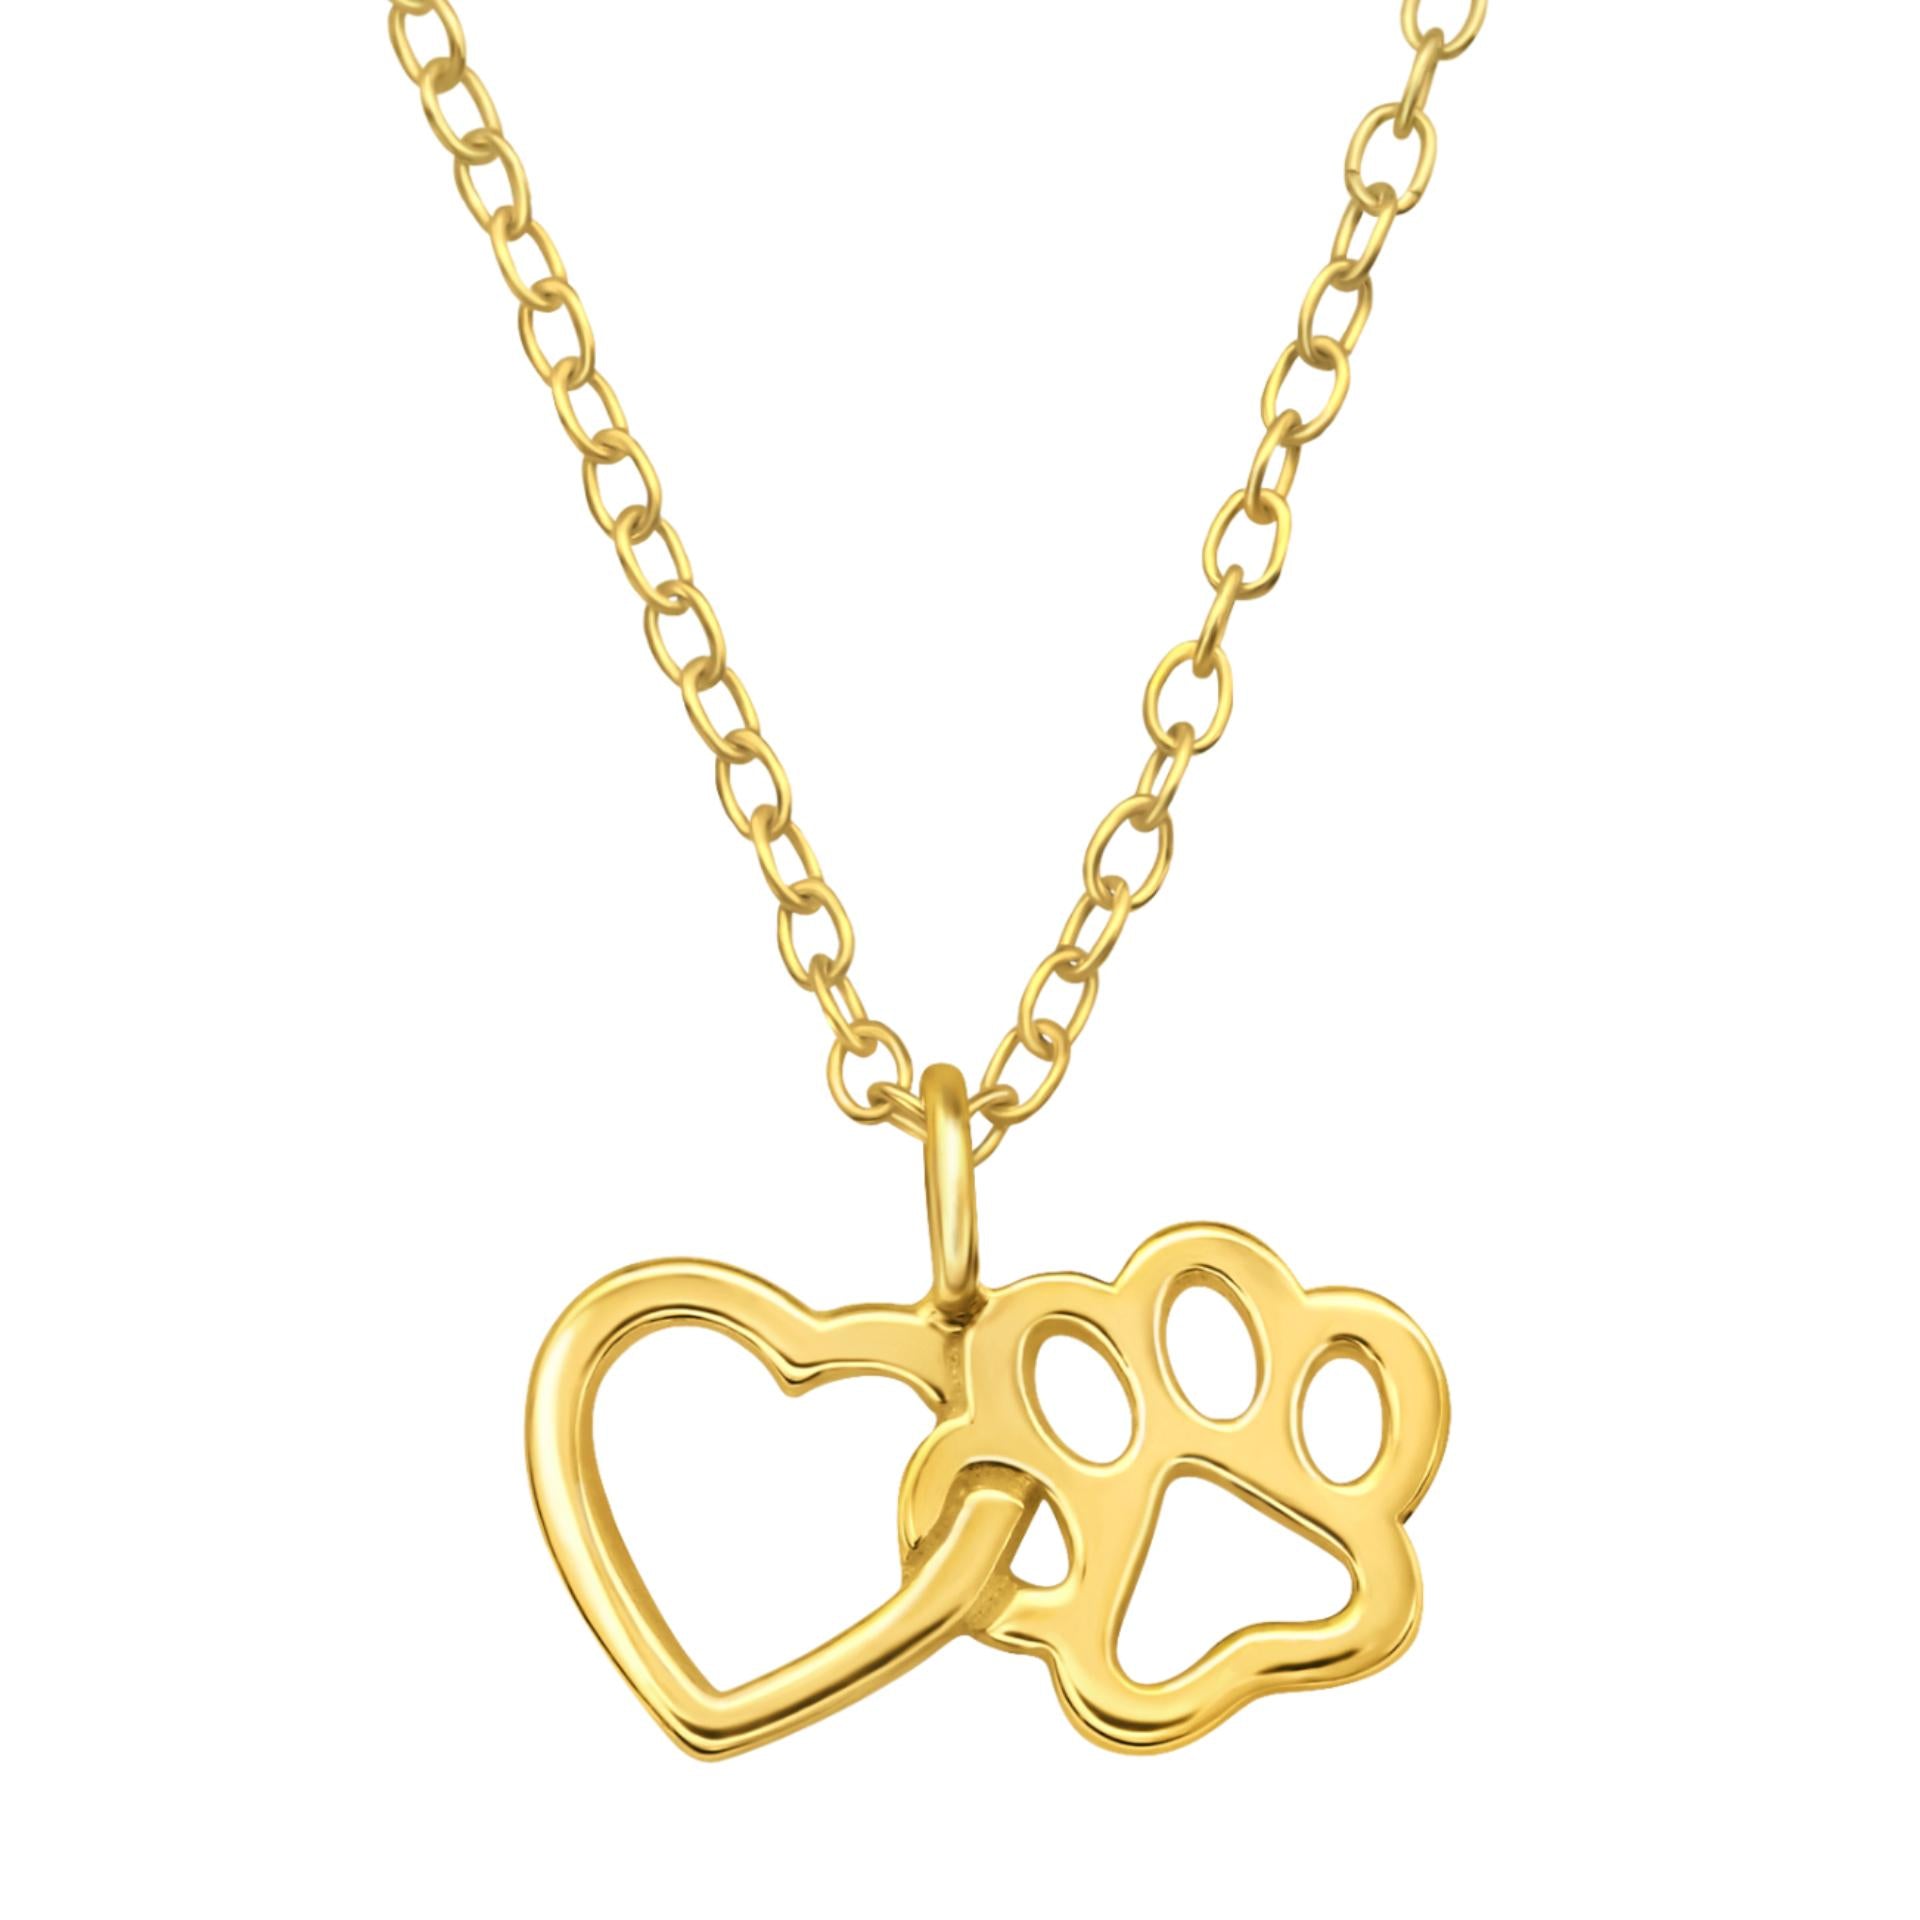 24k Gold Plated Sterling Silver Paw Heart Interlocking Necklace